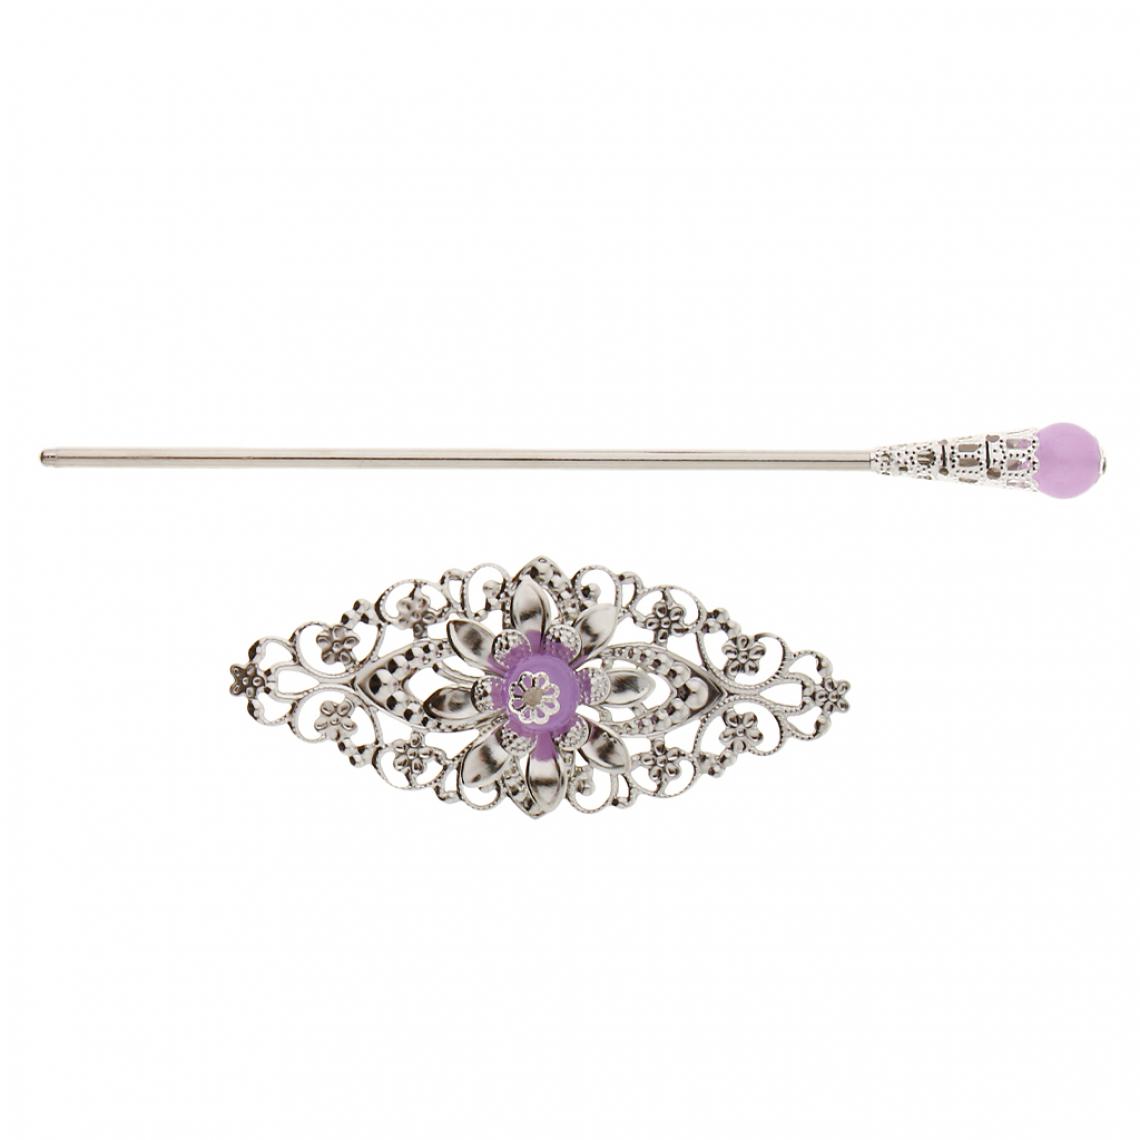 marque generique - Style traditionnel chinois Womens Girls Hair Stick Hairpin Stying Violet - Perles